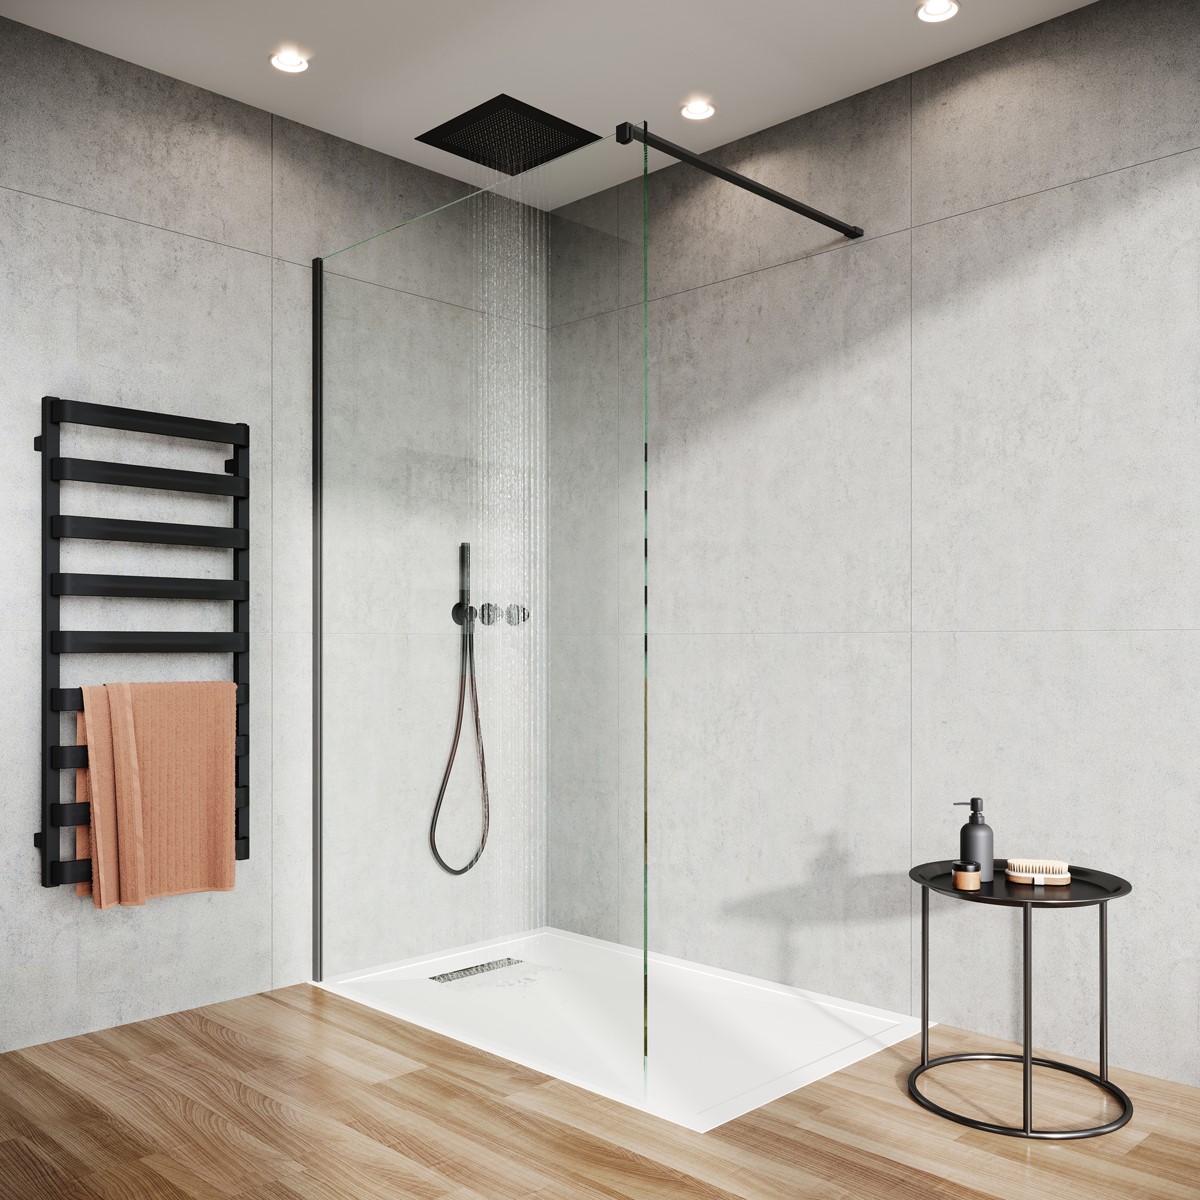 Crosswater Tranquil showerhead in black in a white bathroom design